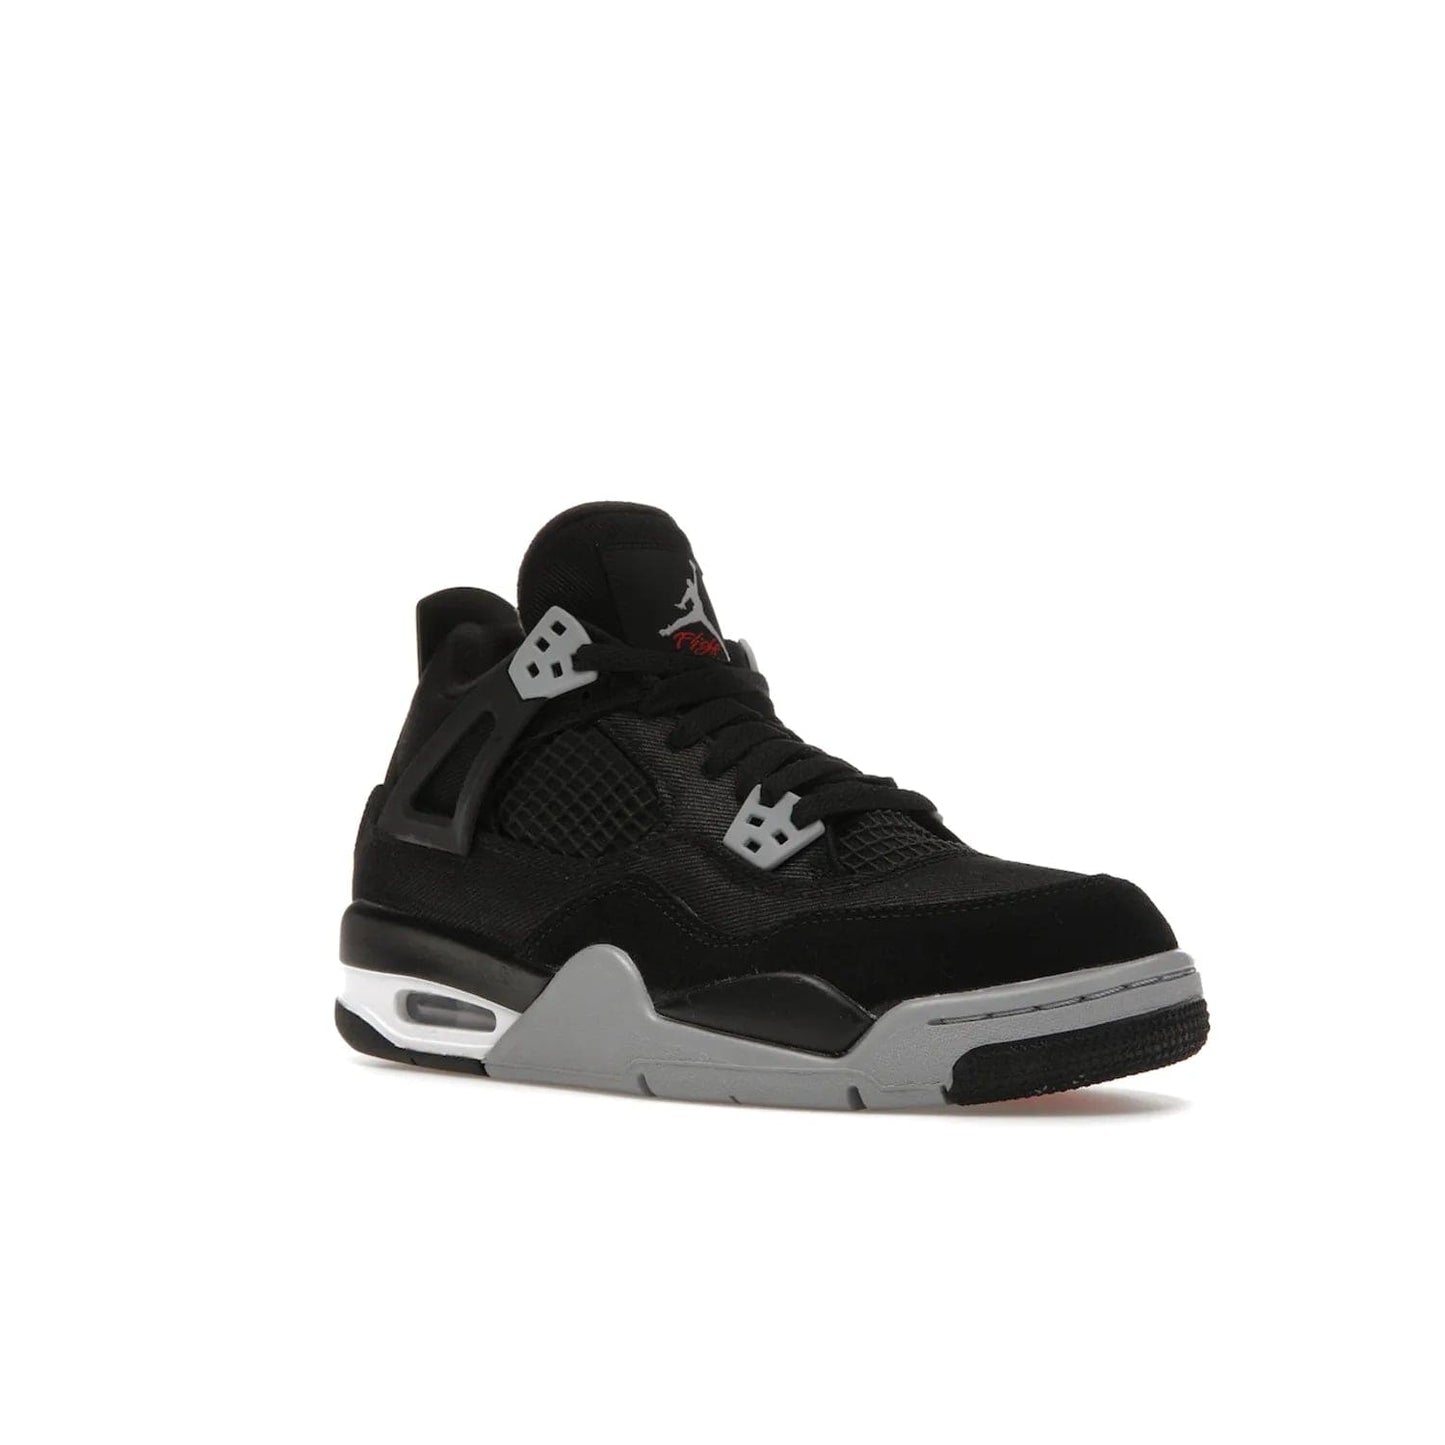 Jordan 4 Retro Black Canvas (GS) - Image 5 - Only at www.BallersClubKickz.com - Premium Air Jordan 4 Retro Black Canvas in grade-schooler's catalog. Featuring black suede canvas upper, grey molding, accents in red, white midsole, woven Jumpman tag, & visible AIR cushioning. Releasing Oct. 1, 2022.